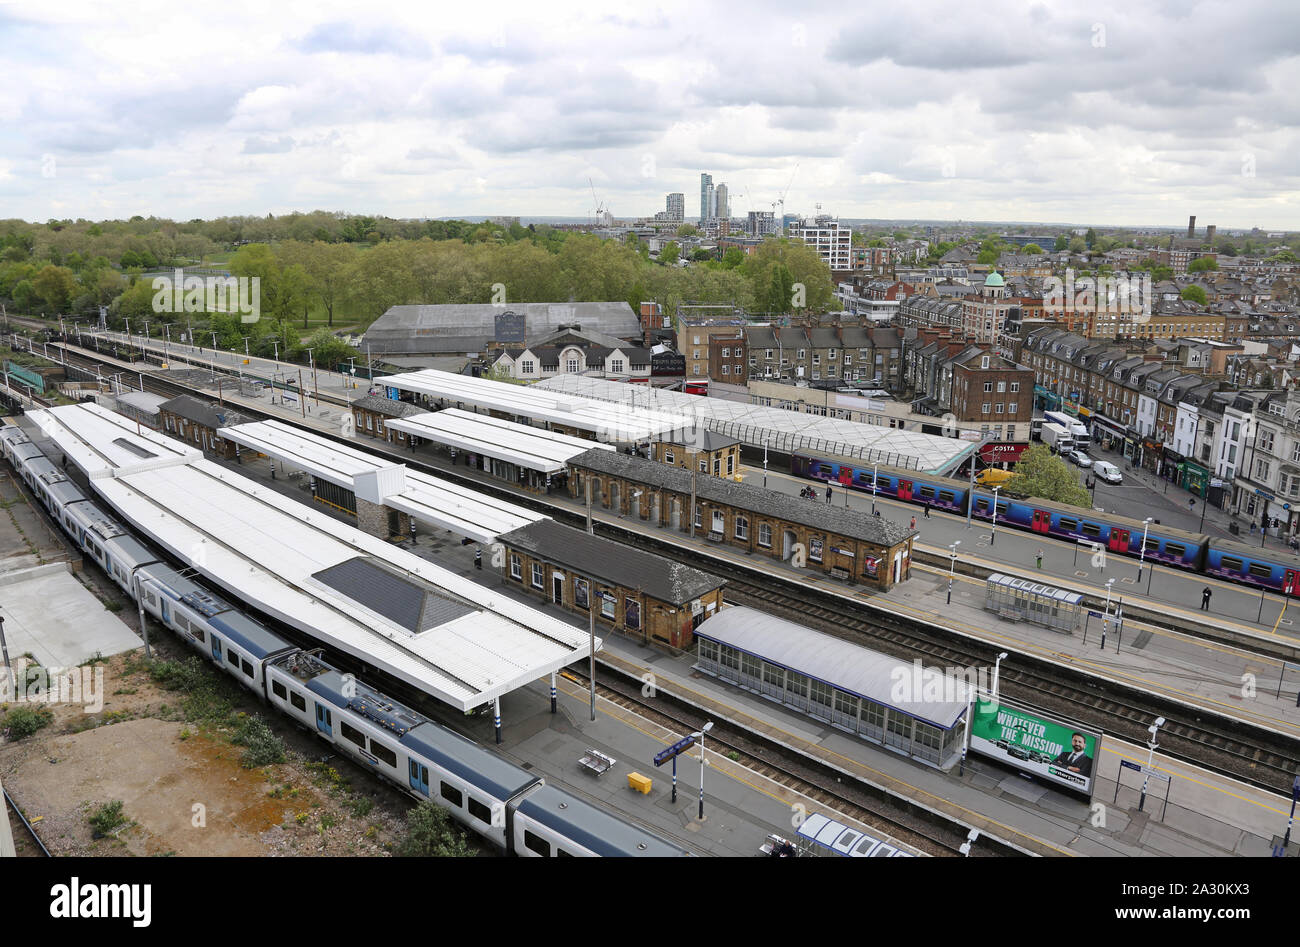 High level view of Finsbury Park station, north London, UK. Shows Thameslink and Great Northern trains. New tower blocks in Tottenham on the horrizon. Stock Photo